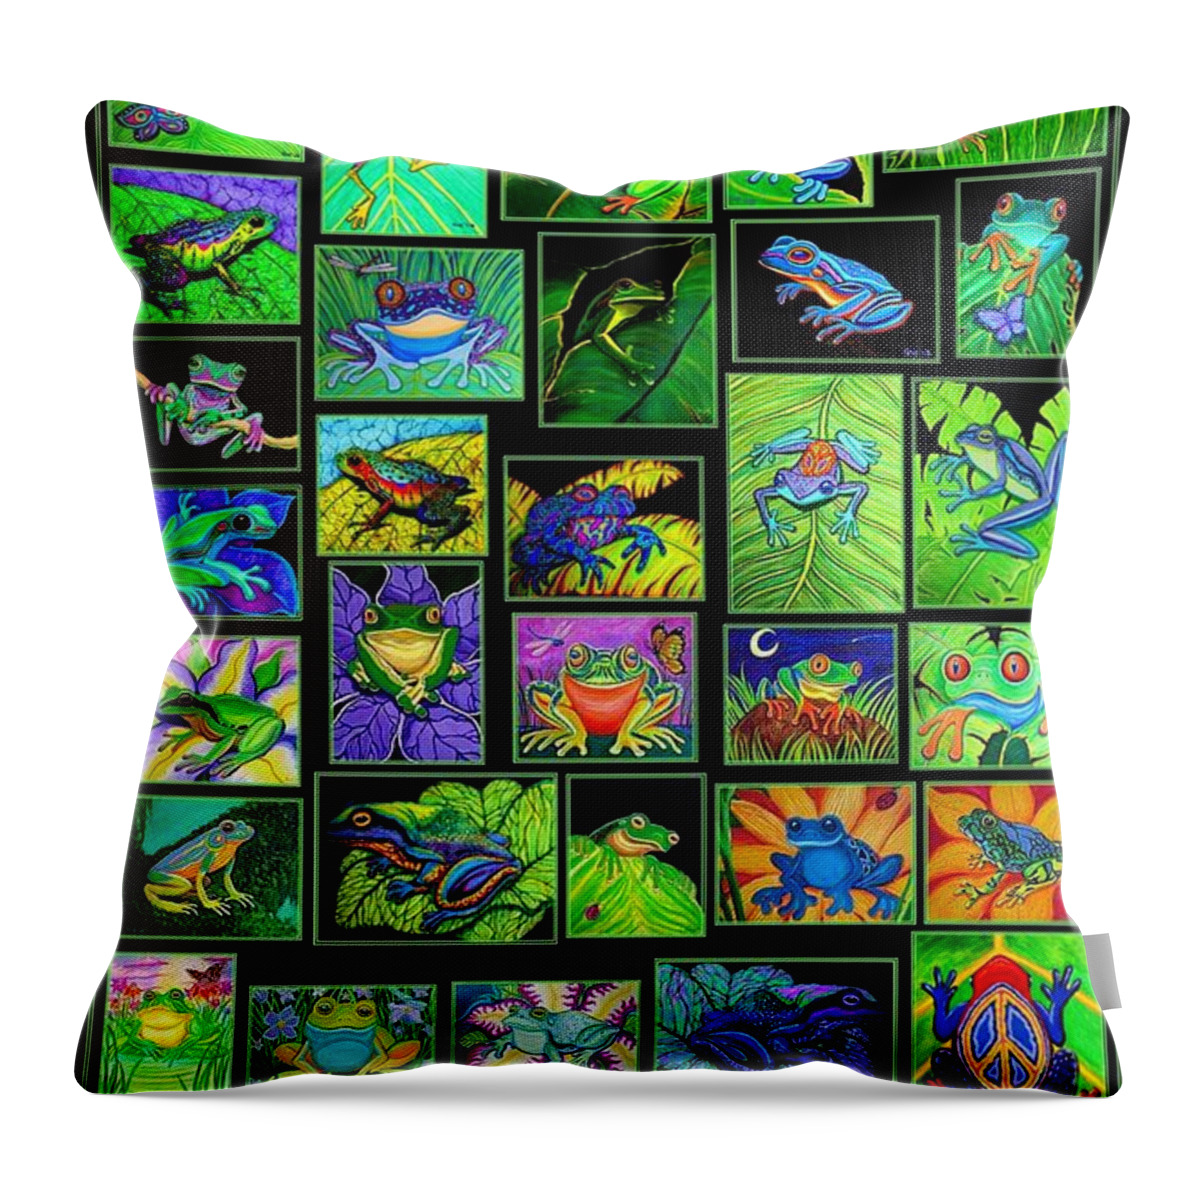 Frogs Throw Pillow featuring the digital art Frogs Poster by Nick Gustafson